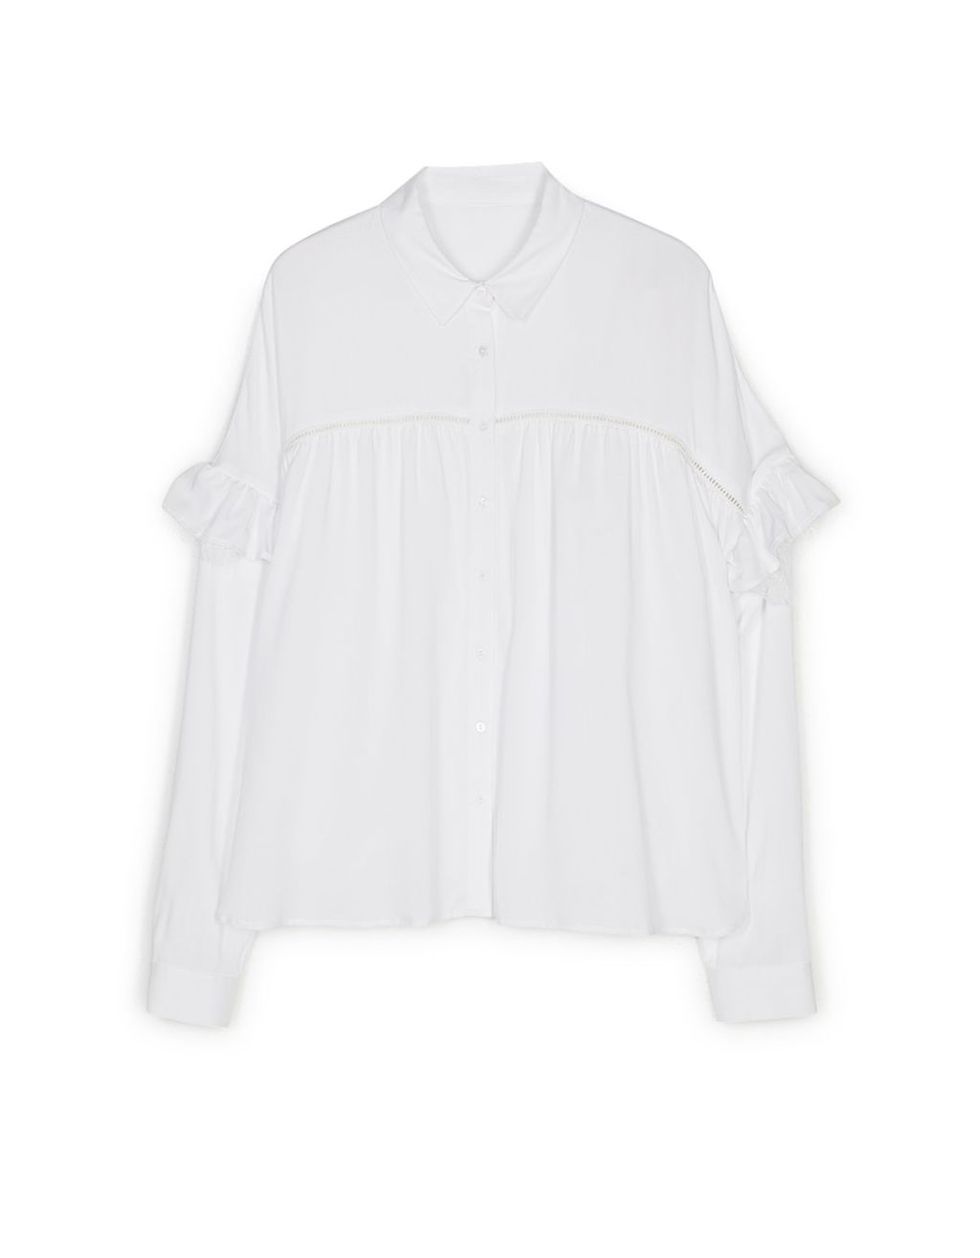 Clothing, White, Sleeve, Outerwear, Blouse, T-shirt, Top, Collar, Neck, Shirt, 